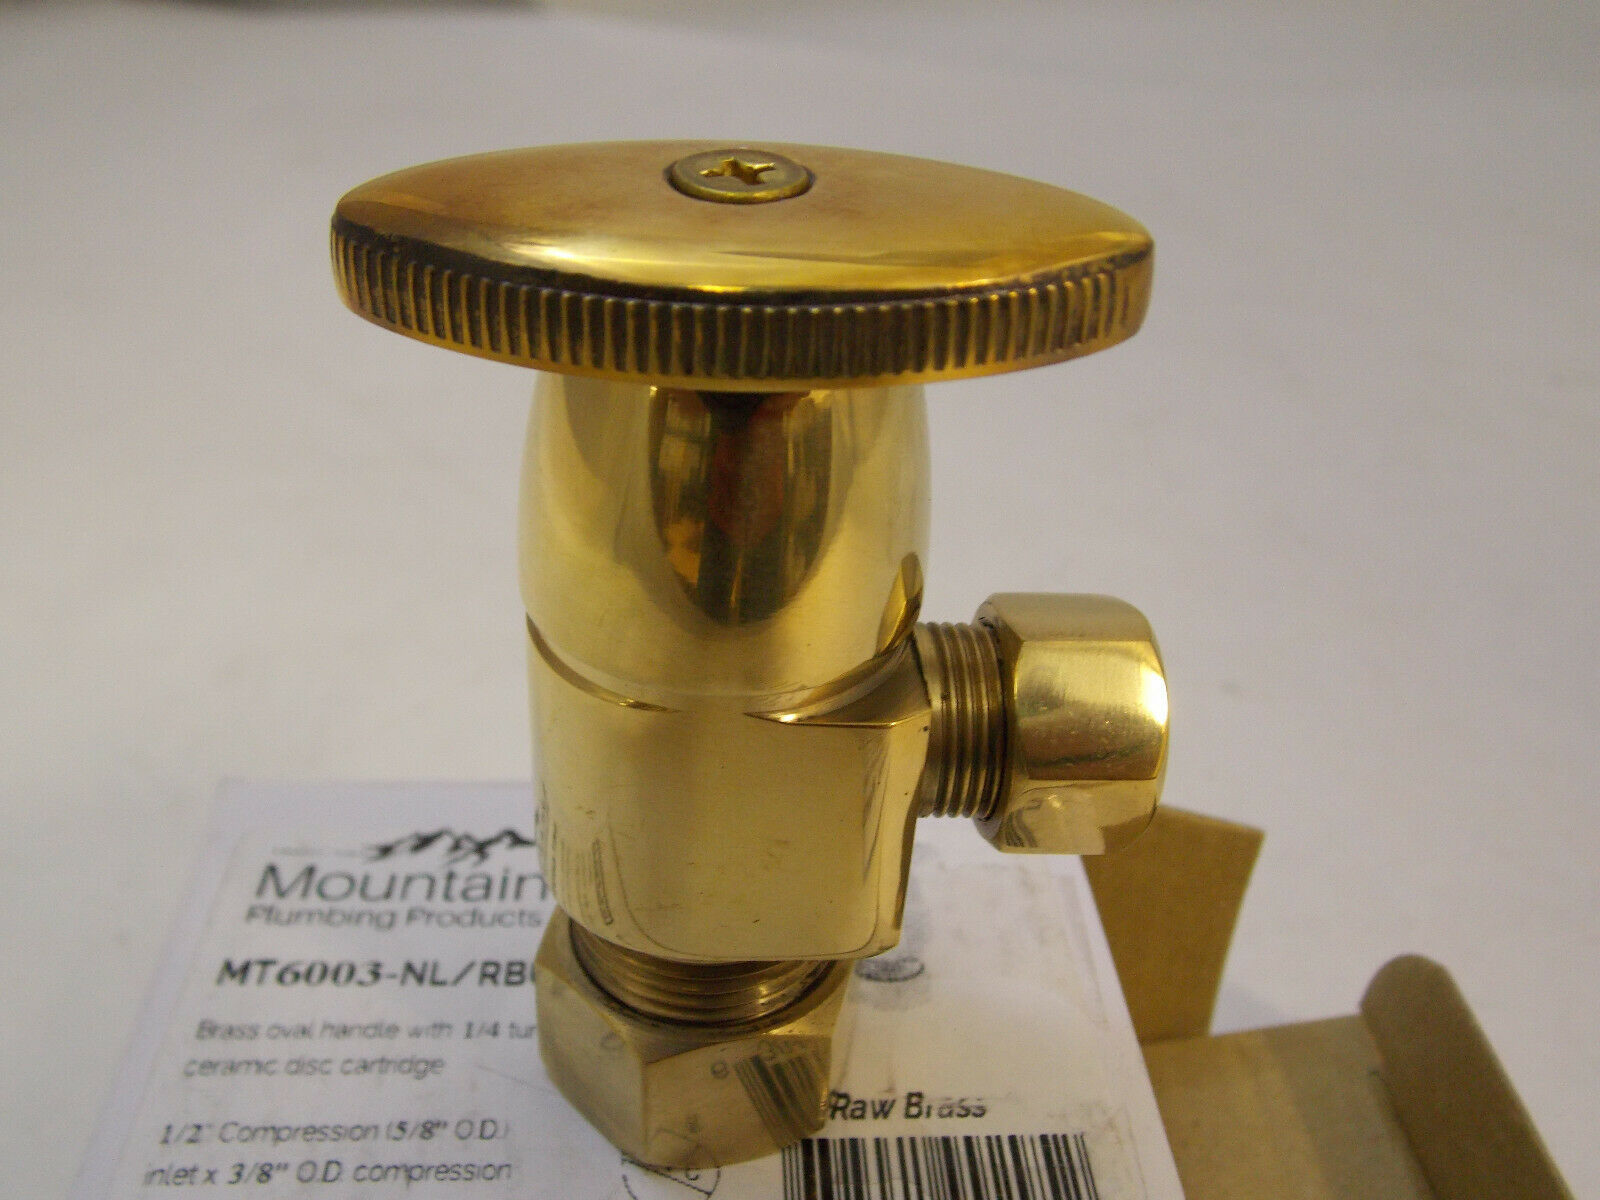 Primary image for Mountain Plumbing MT6003-NL/RBUN Oval Handle Angle Valve - Raw Brass